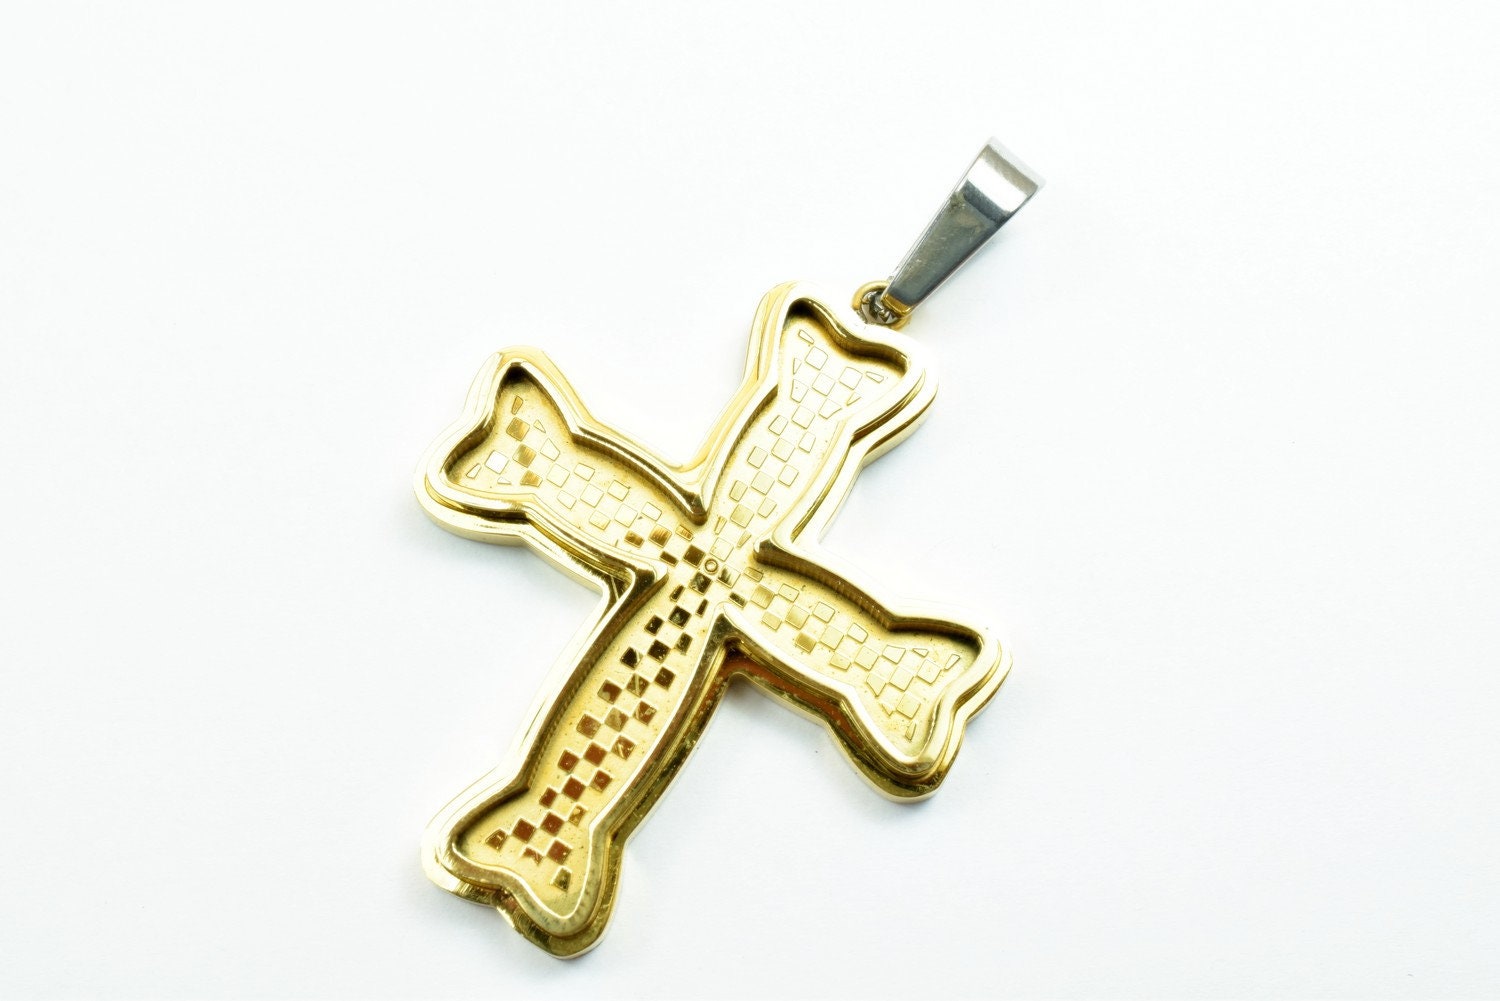 18K Gold Filled Cross Pendant Stainless Steel Size 45x36mm, Thickness 4.5mm Christian Religious Cross For Jewelry Making